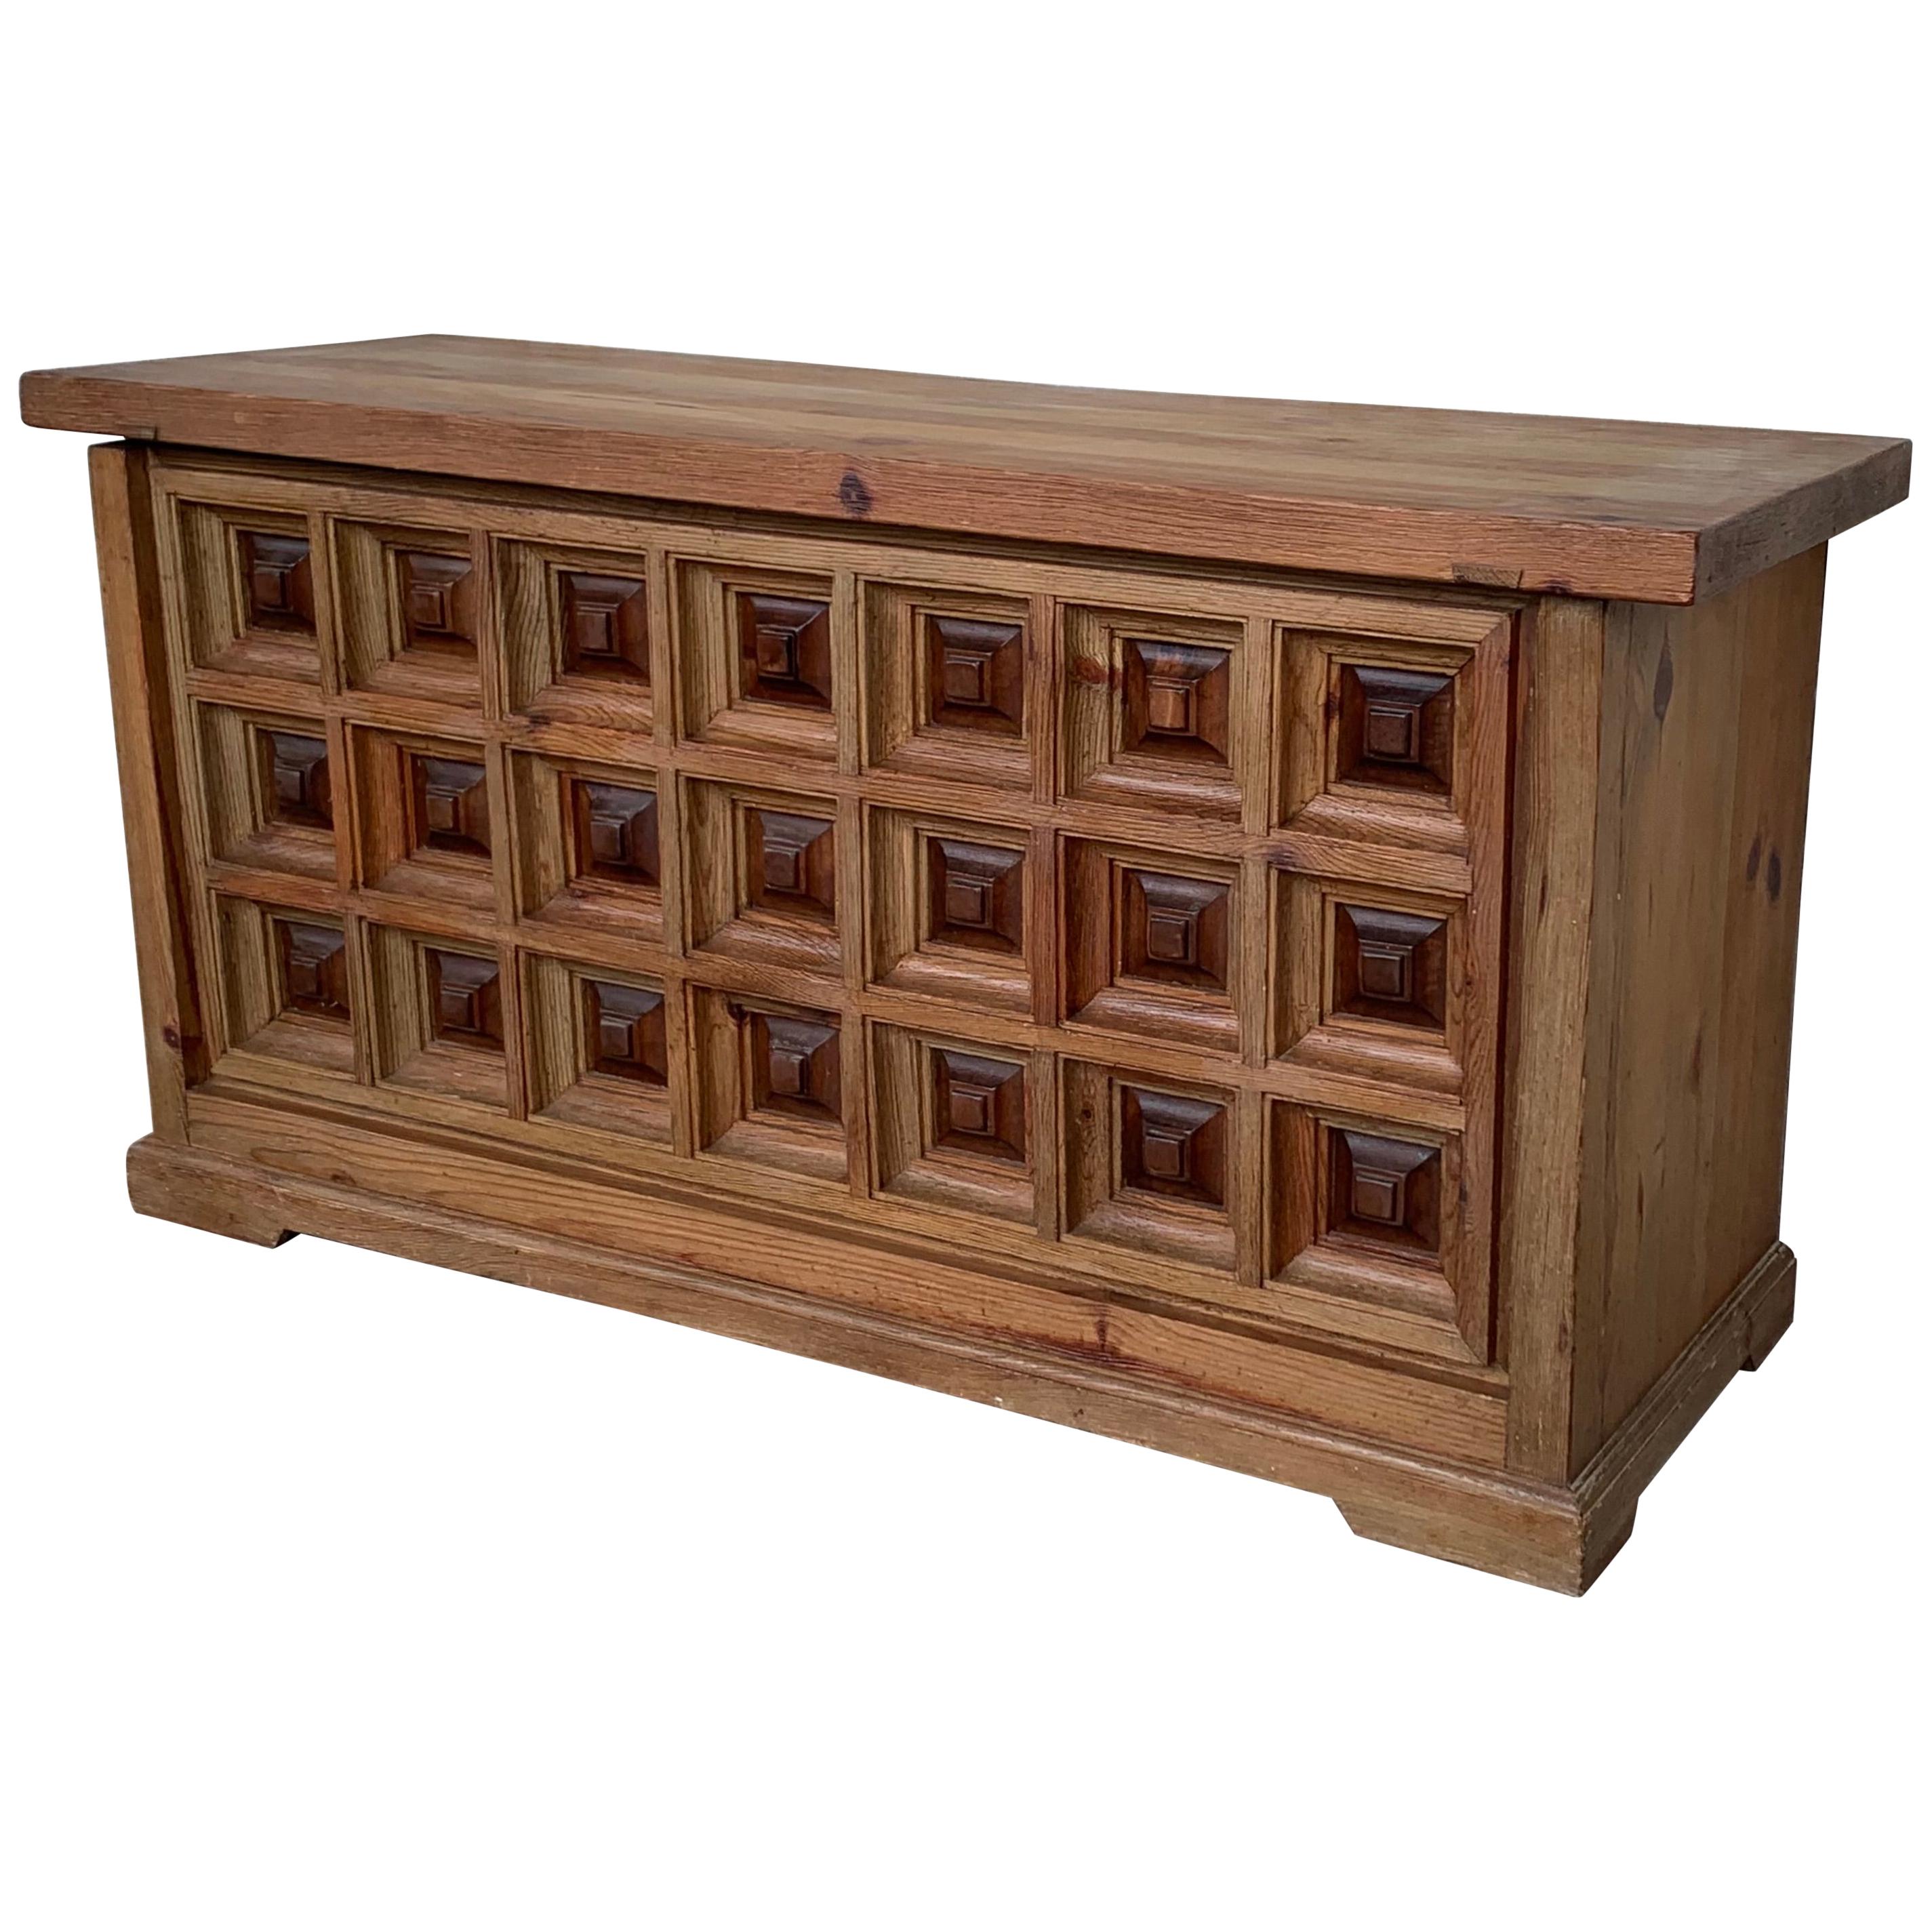 20th Spanish Trunk, Blanket Chest with Raised Wooden Panels and Iron Hardware